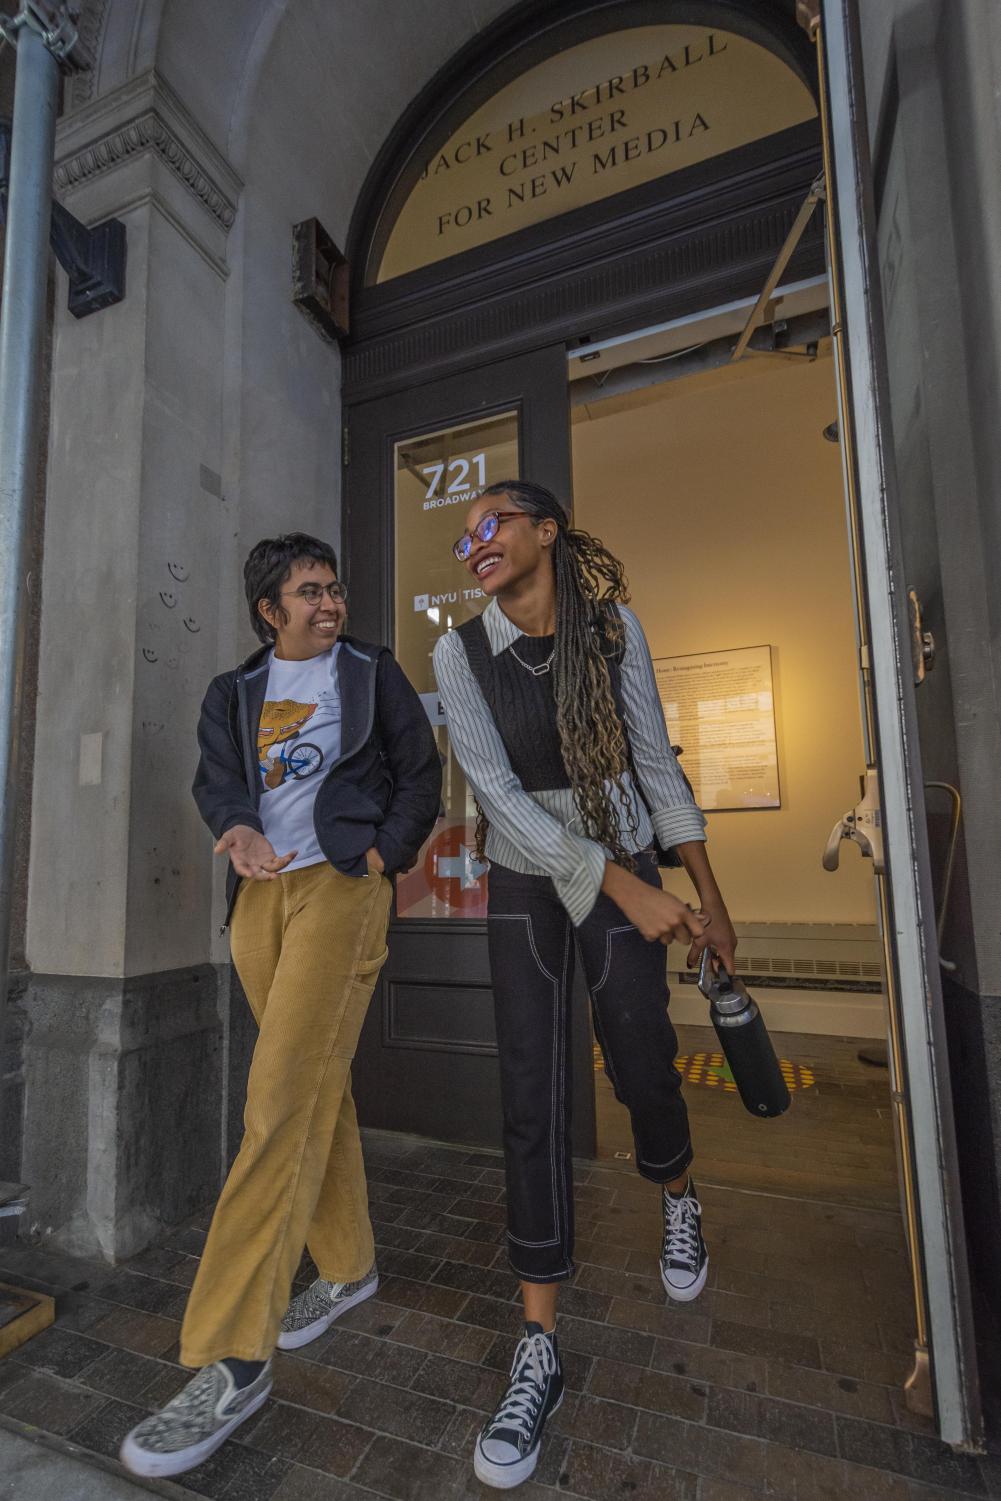 Janelle Hernandez (left) and Niya Leigh (right) smile at one another as they walk out of a Tisch building. Janelle is wearing a white graphic t-shirt, a black windbreaker and muted yellow corduroy pants. Niya is wearing a vertically striped gray dress shirt, black cropped cable-knit sweater and black denim pants with white stitching.